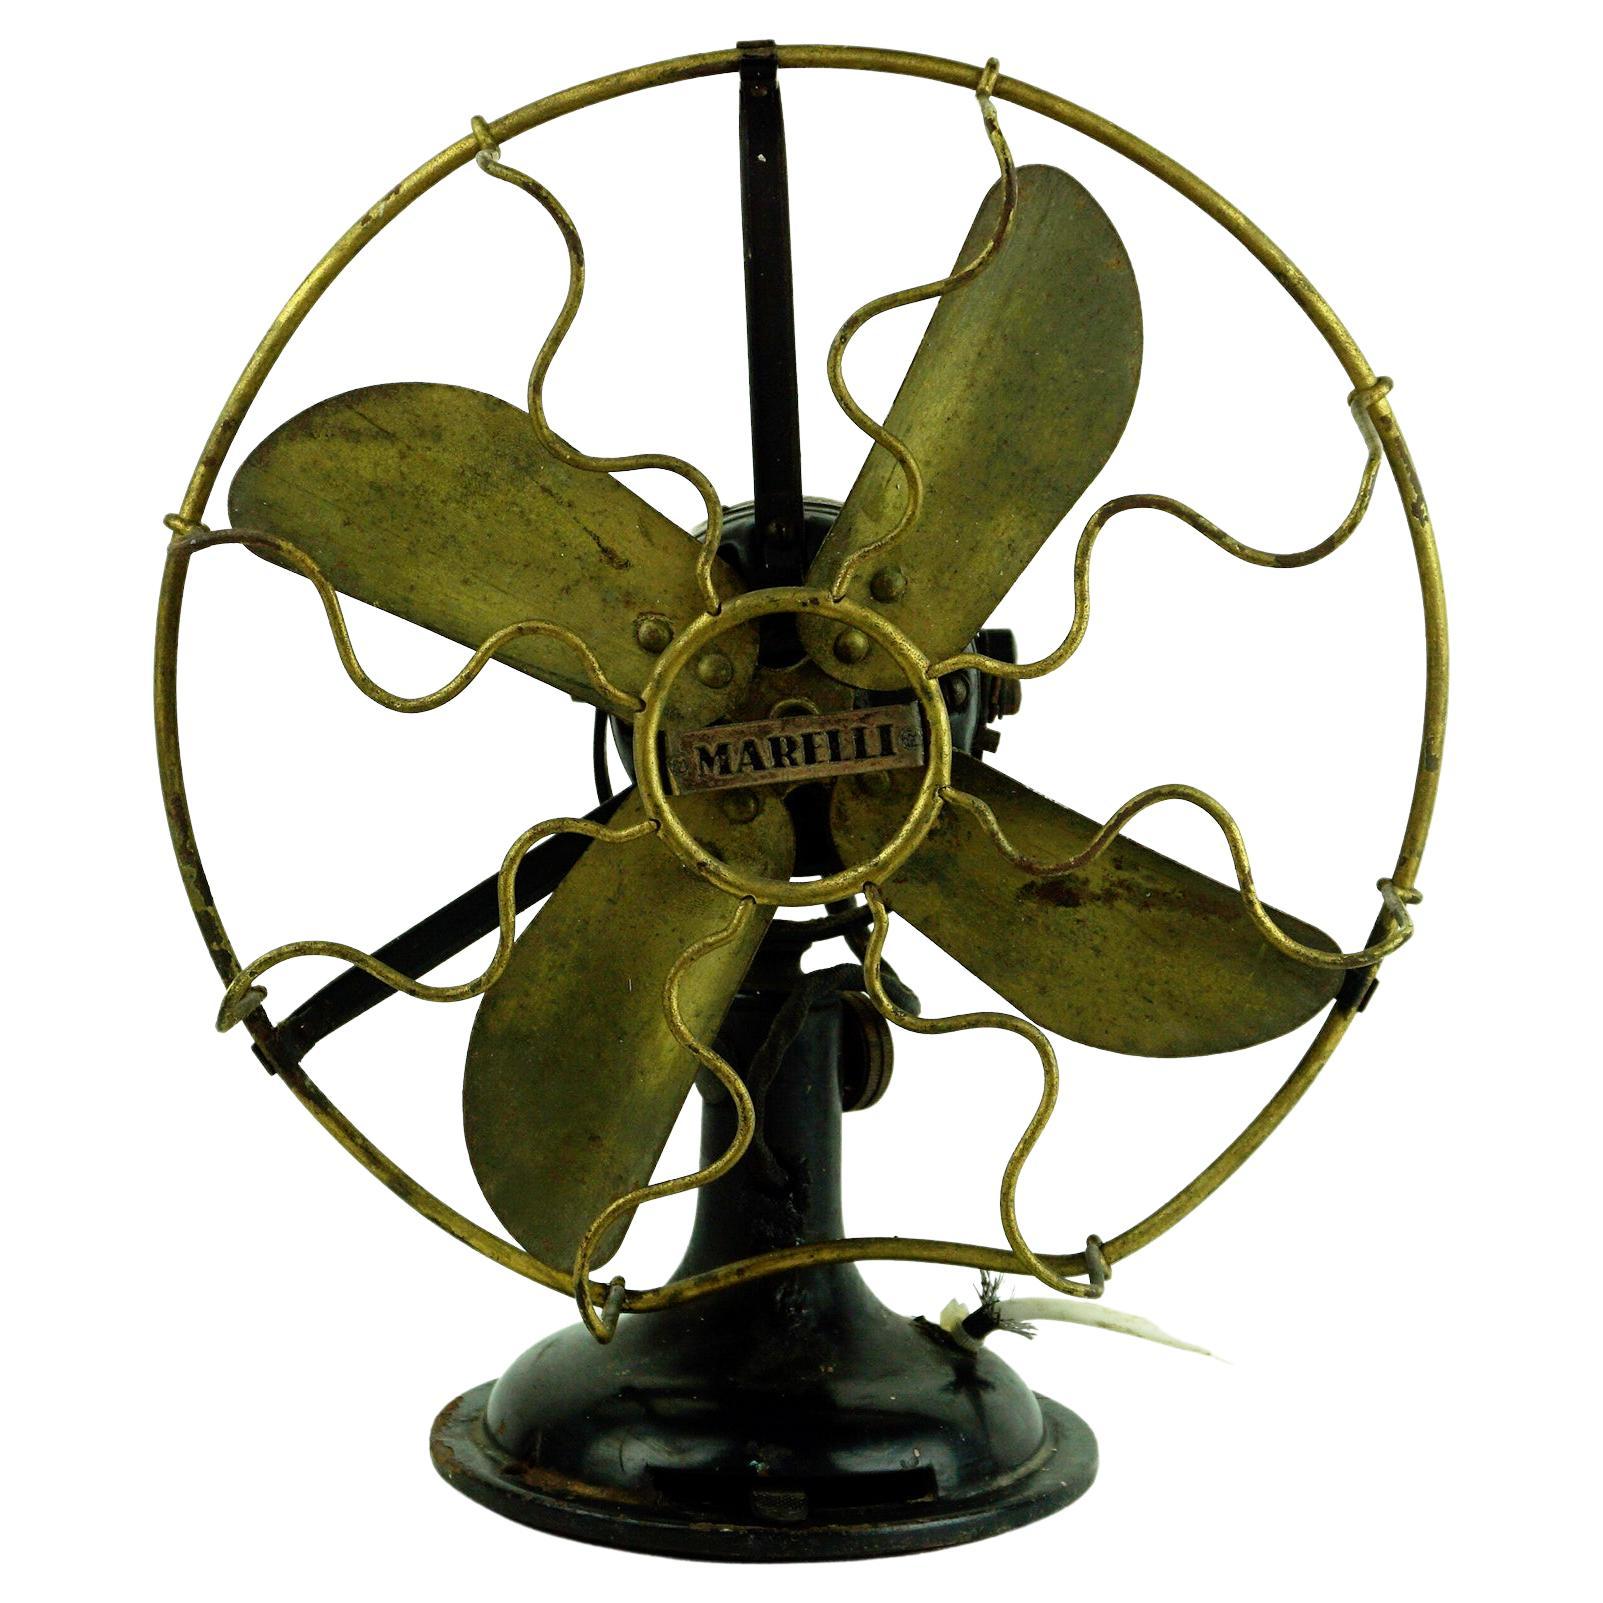 0riginal Vintage Industrial Art Deco Table Fan by Marelli Italy For Sale